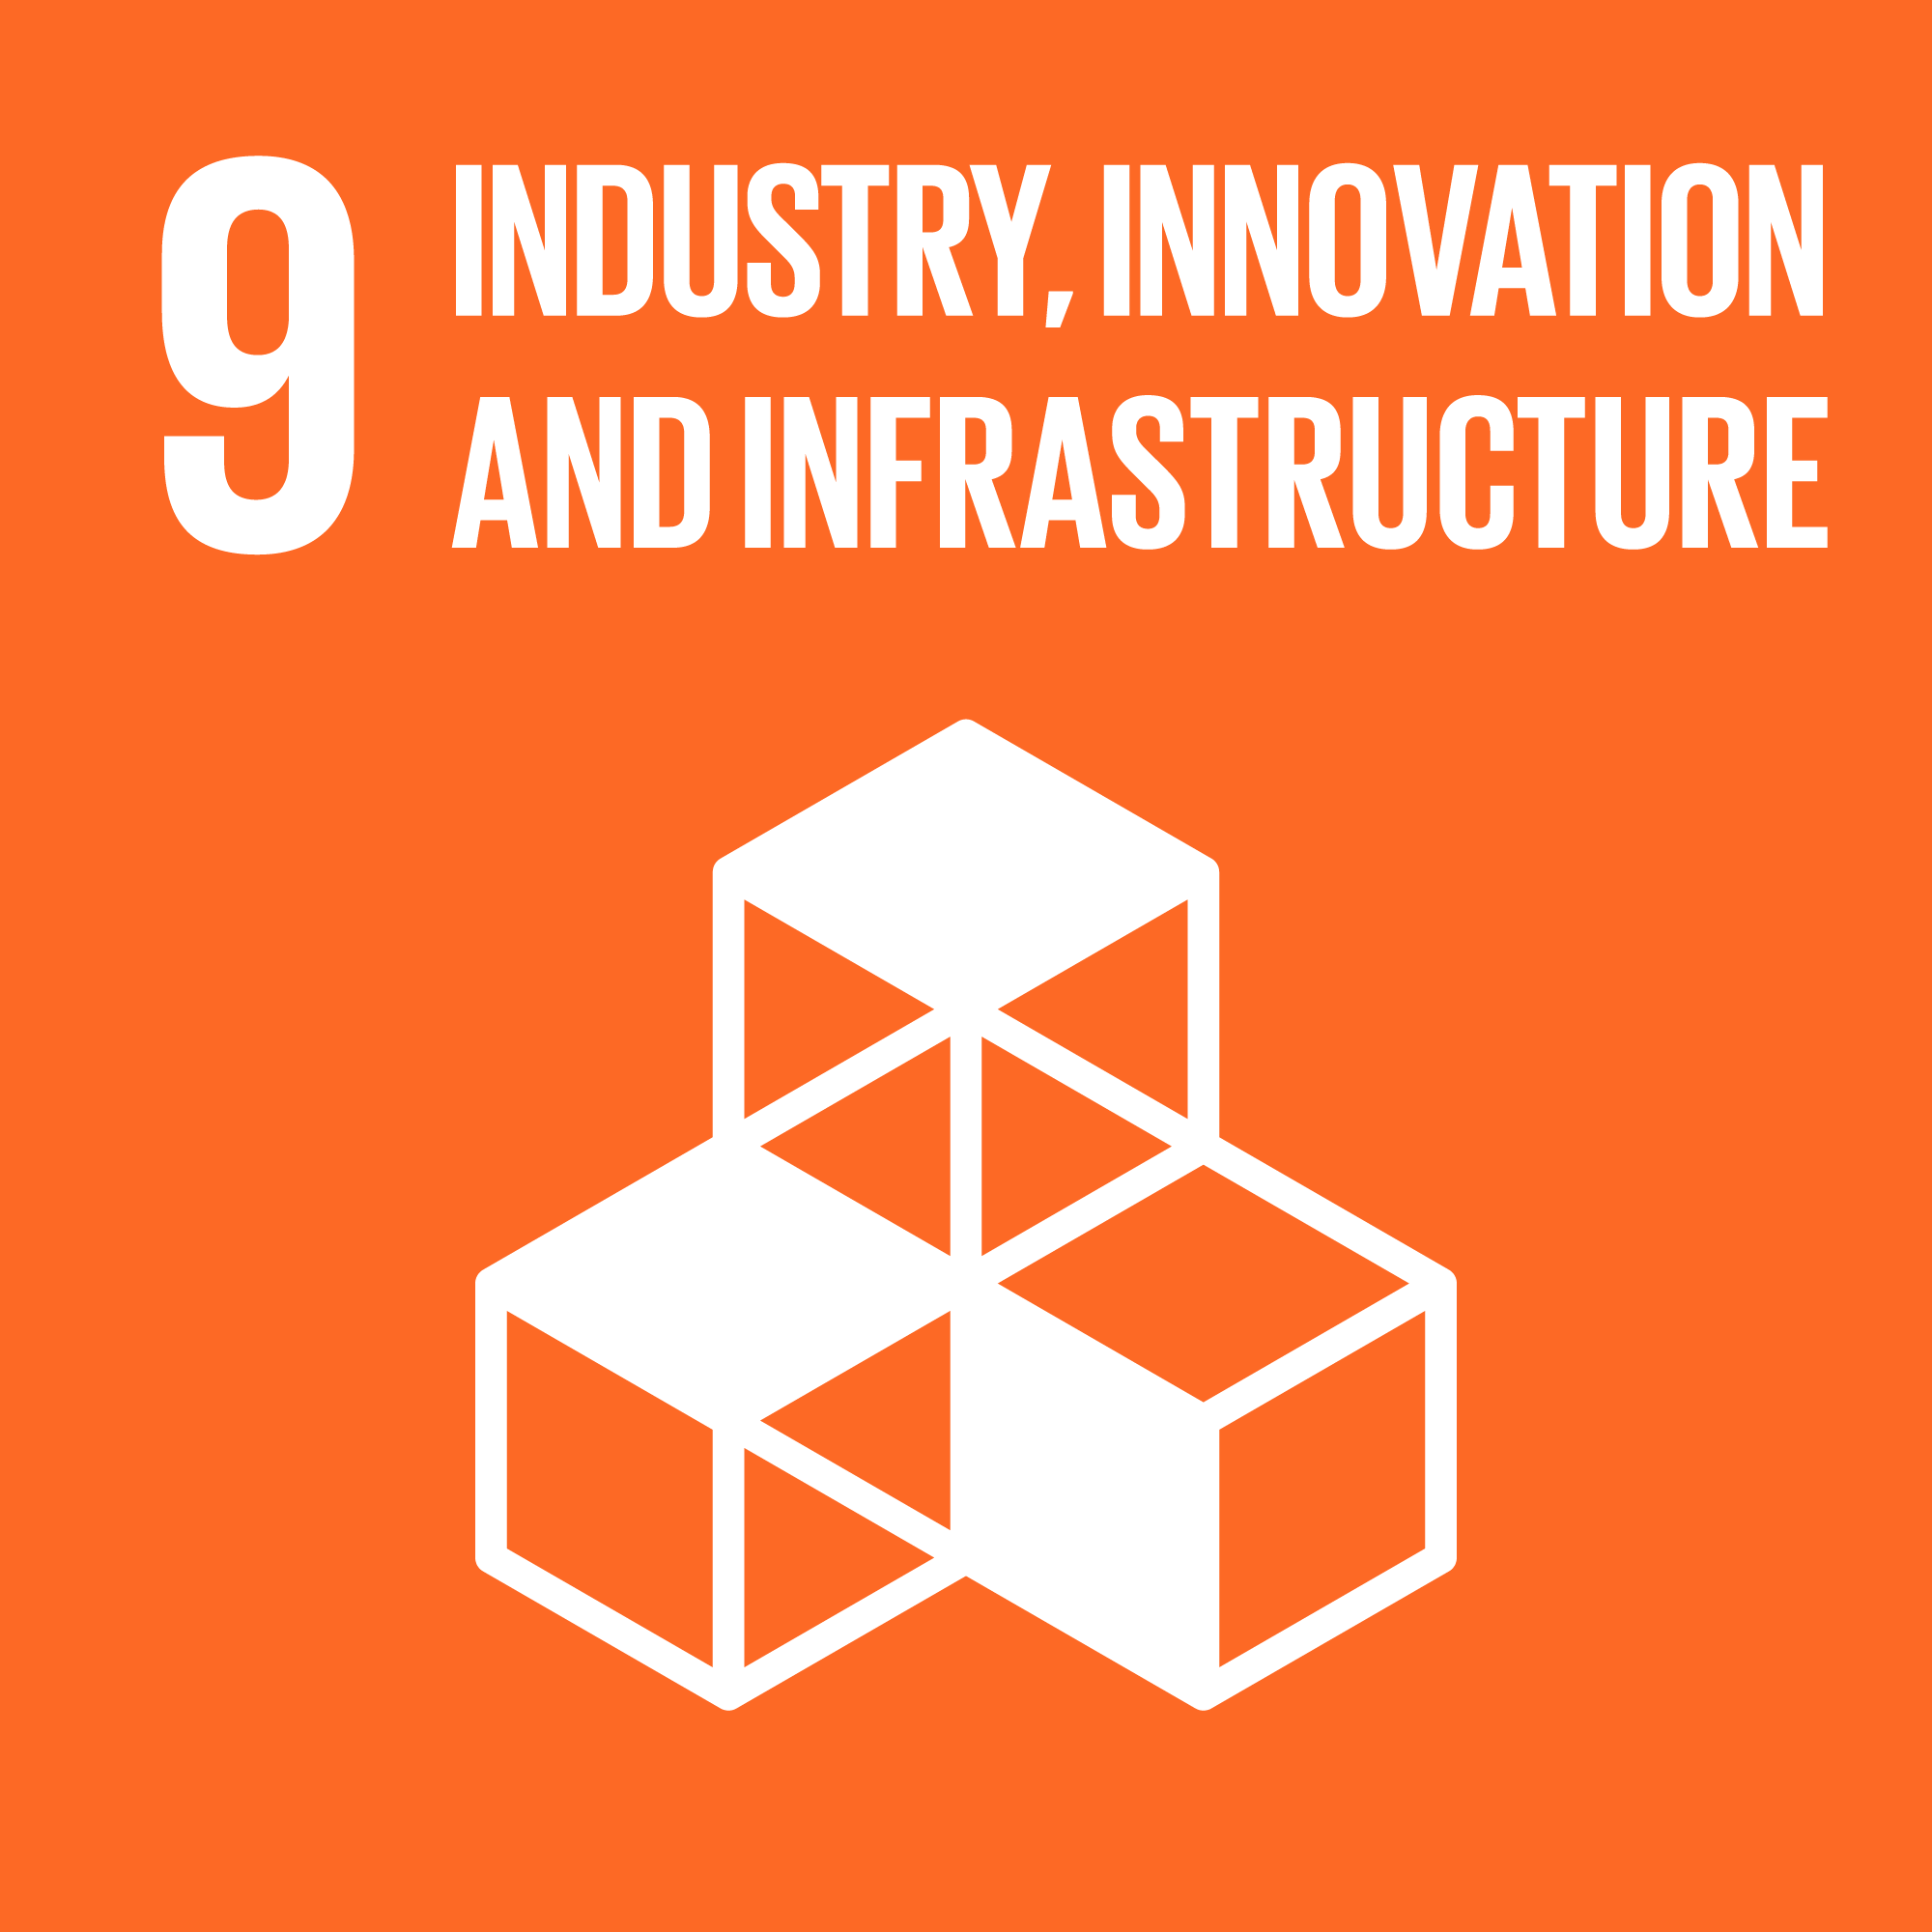 Go to https://www.globalgoals.org/9-industry-innovation-and-infrastructure